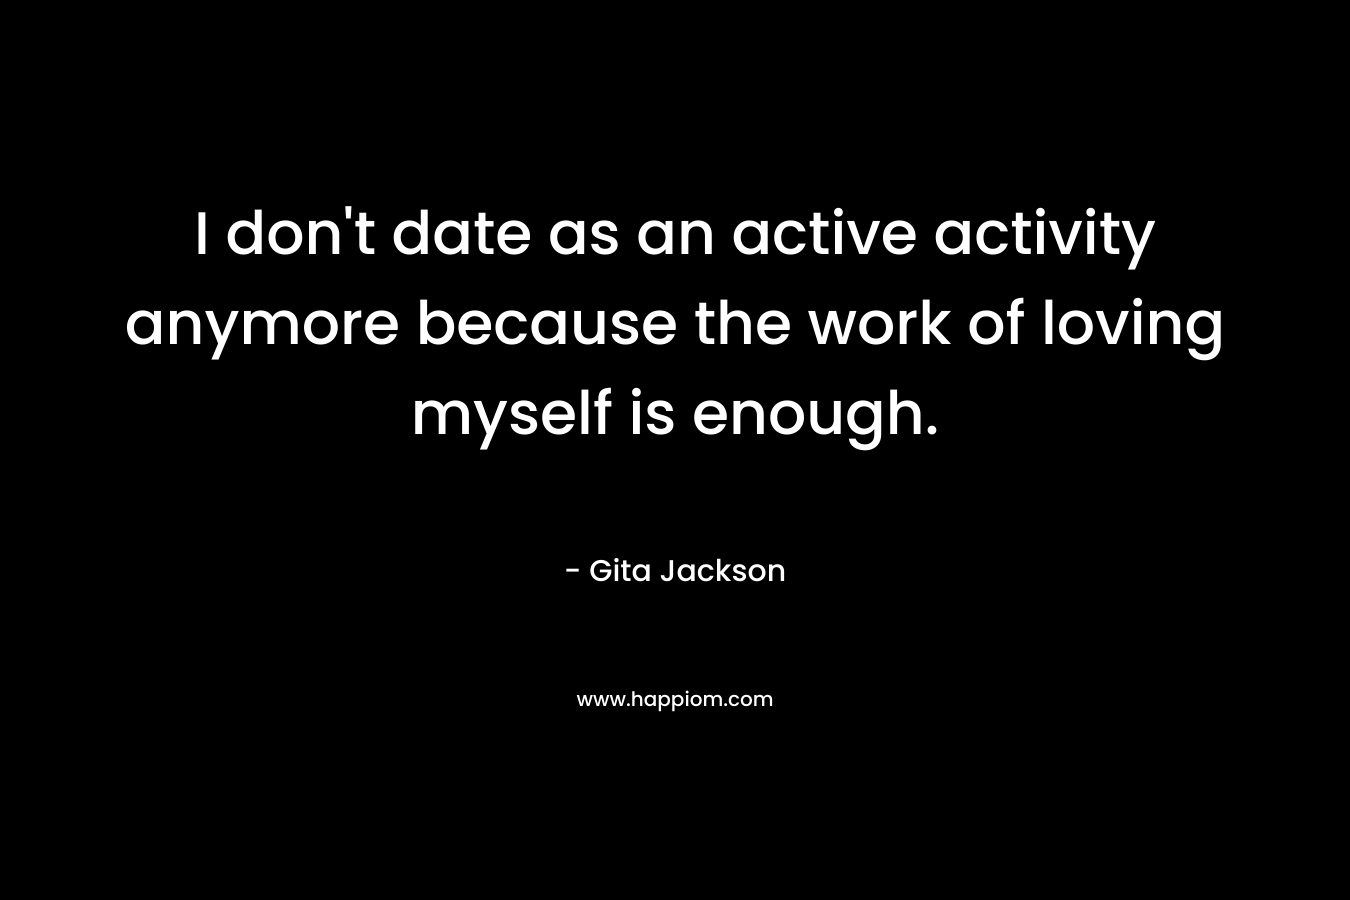 I don't date as an active activity anymore because the work of loving myself is enough.